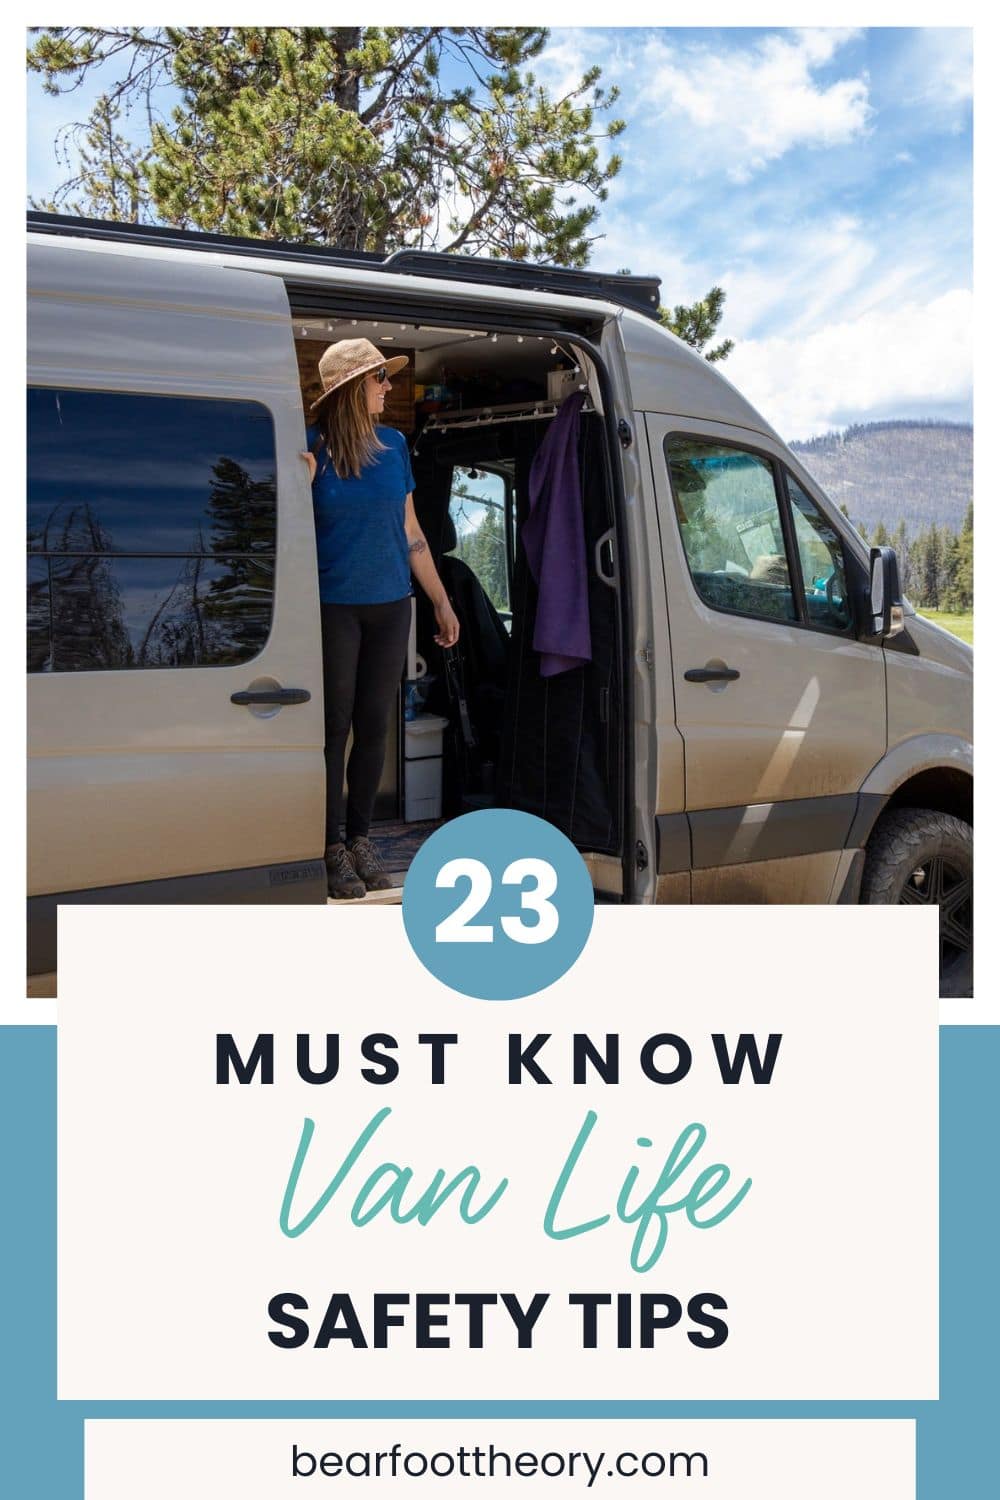 Are you planning to hit the road as a van lifer? Our latest blog post offers practical and effective tips to keep you safe and secure while living life on the road. From securing your vehicle and staying aware of your surroundings to protecting yourself from natural hazards and dangerous situations, our guide covers all the essential safety measures you need to know.